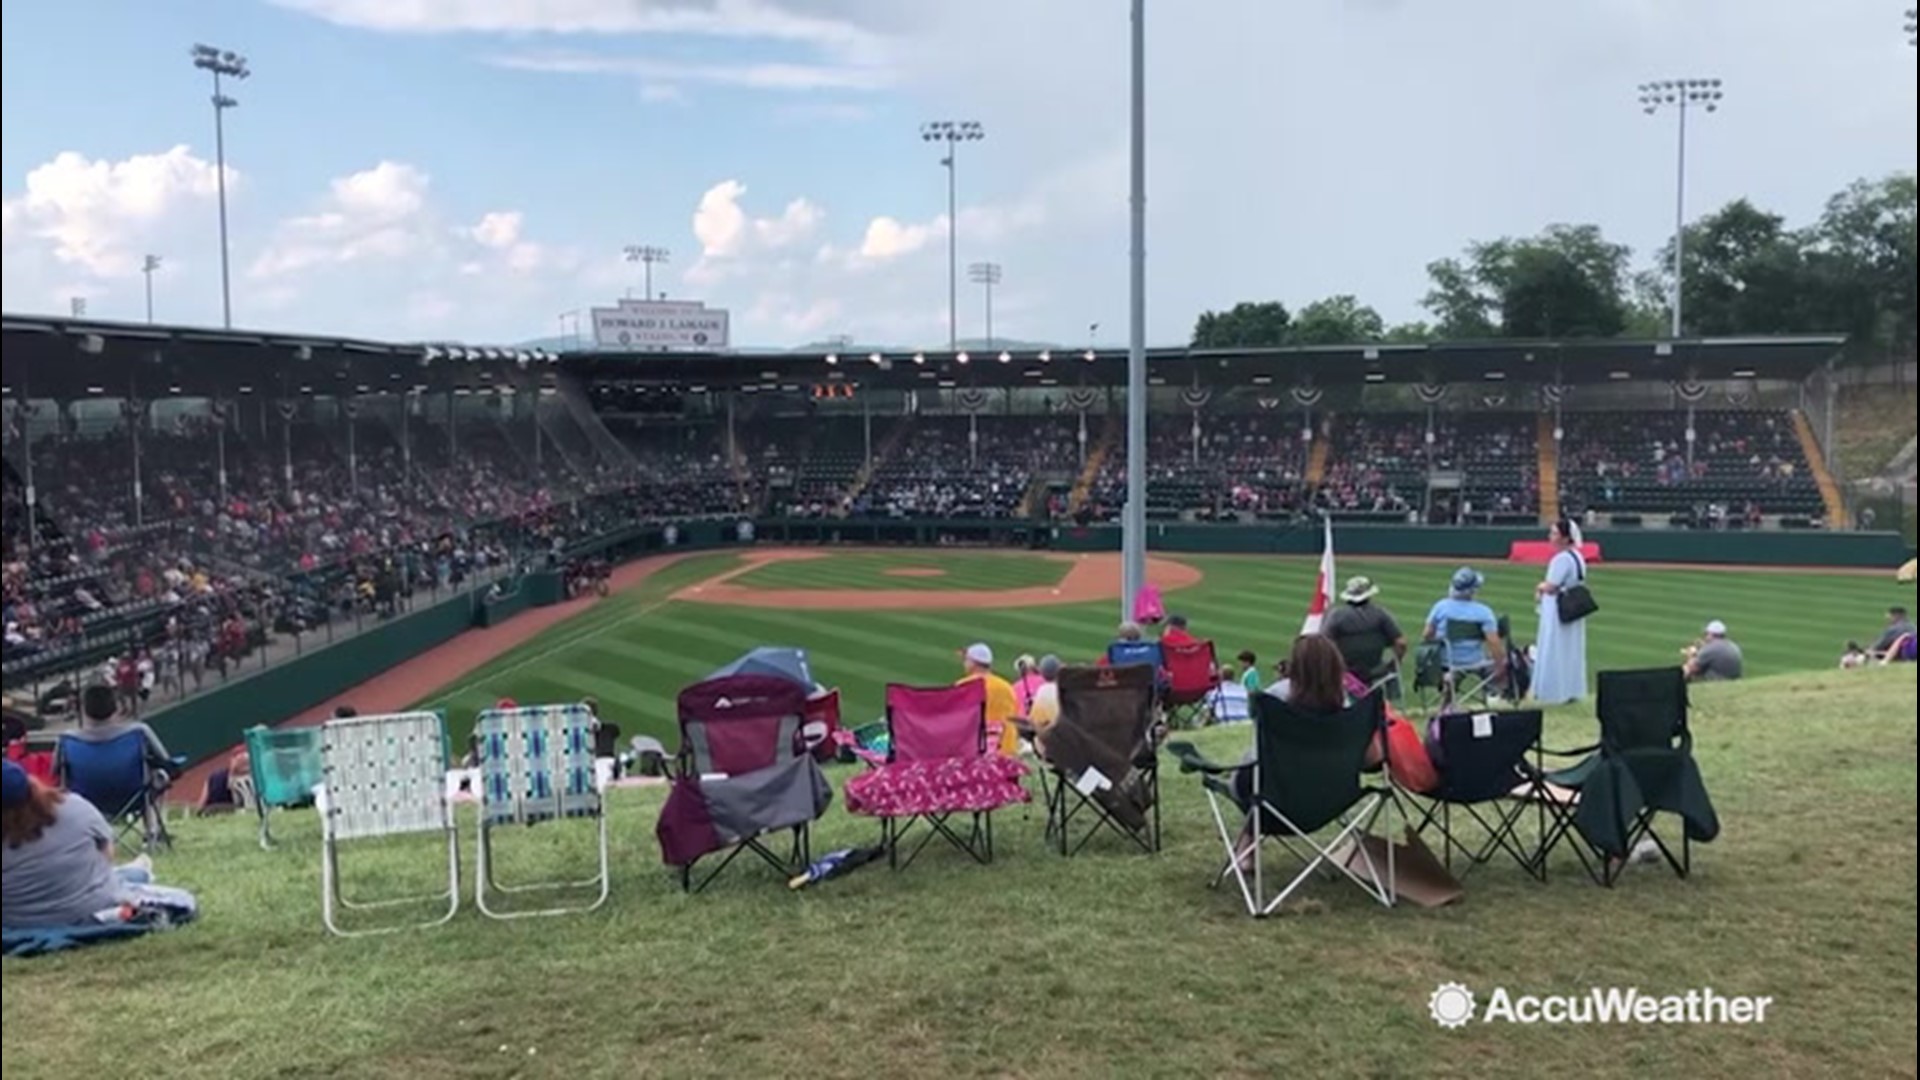 Baseball fans at the Little League World Series share their ideal weather conditions for watching baseball in Williamsport, Pennsylvania.